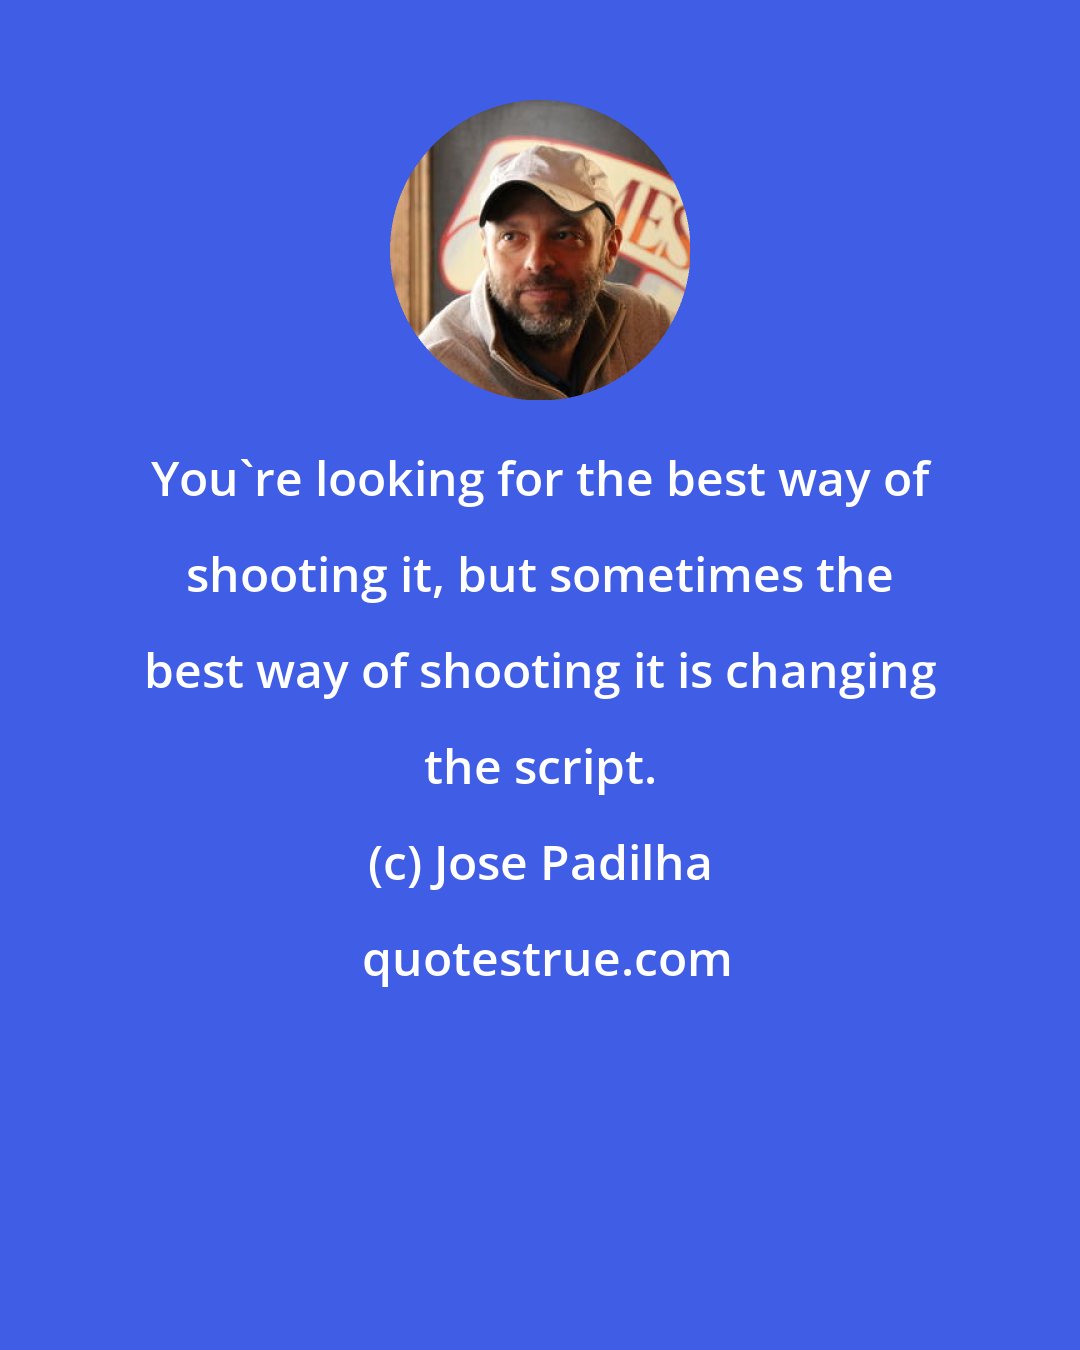 Jose Padilha: You're looking for the best way of shooting it, but sometimes the best way of shooting it is changing the script.